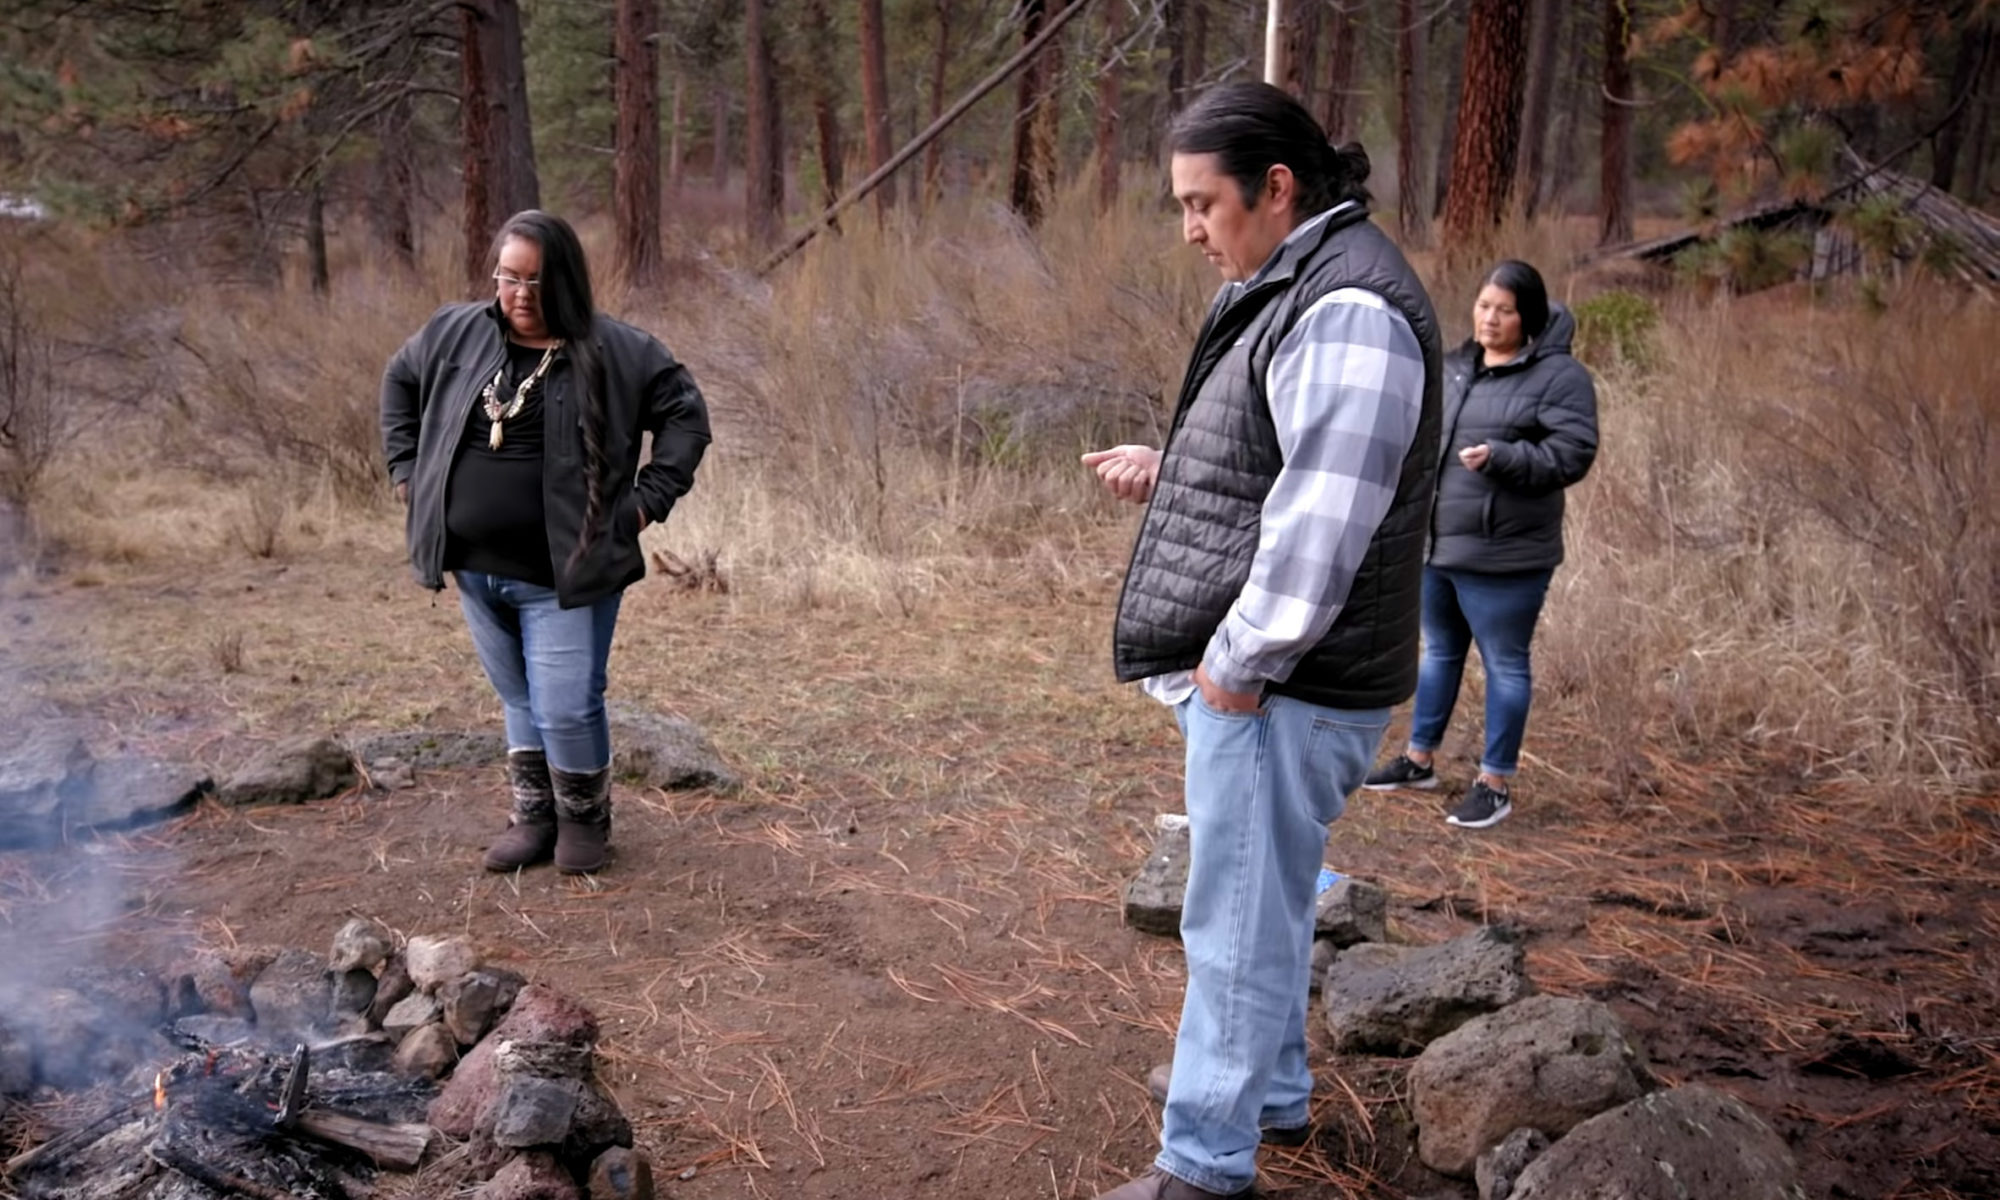 Klamath Tribe members building a fire on their land